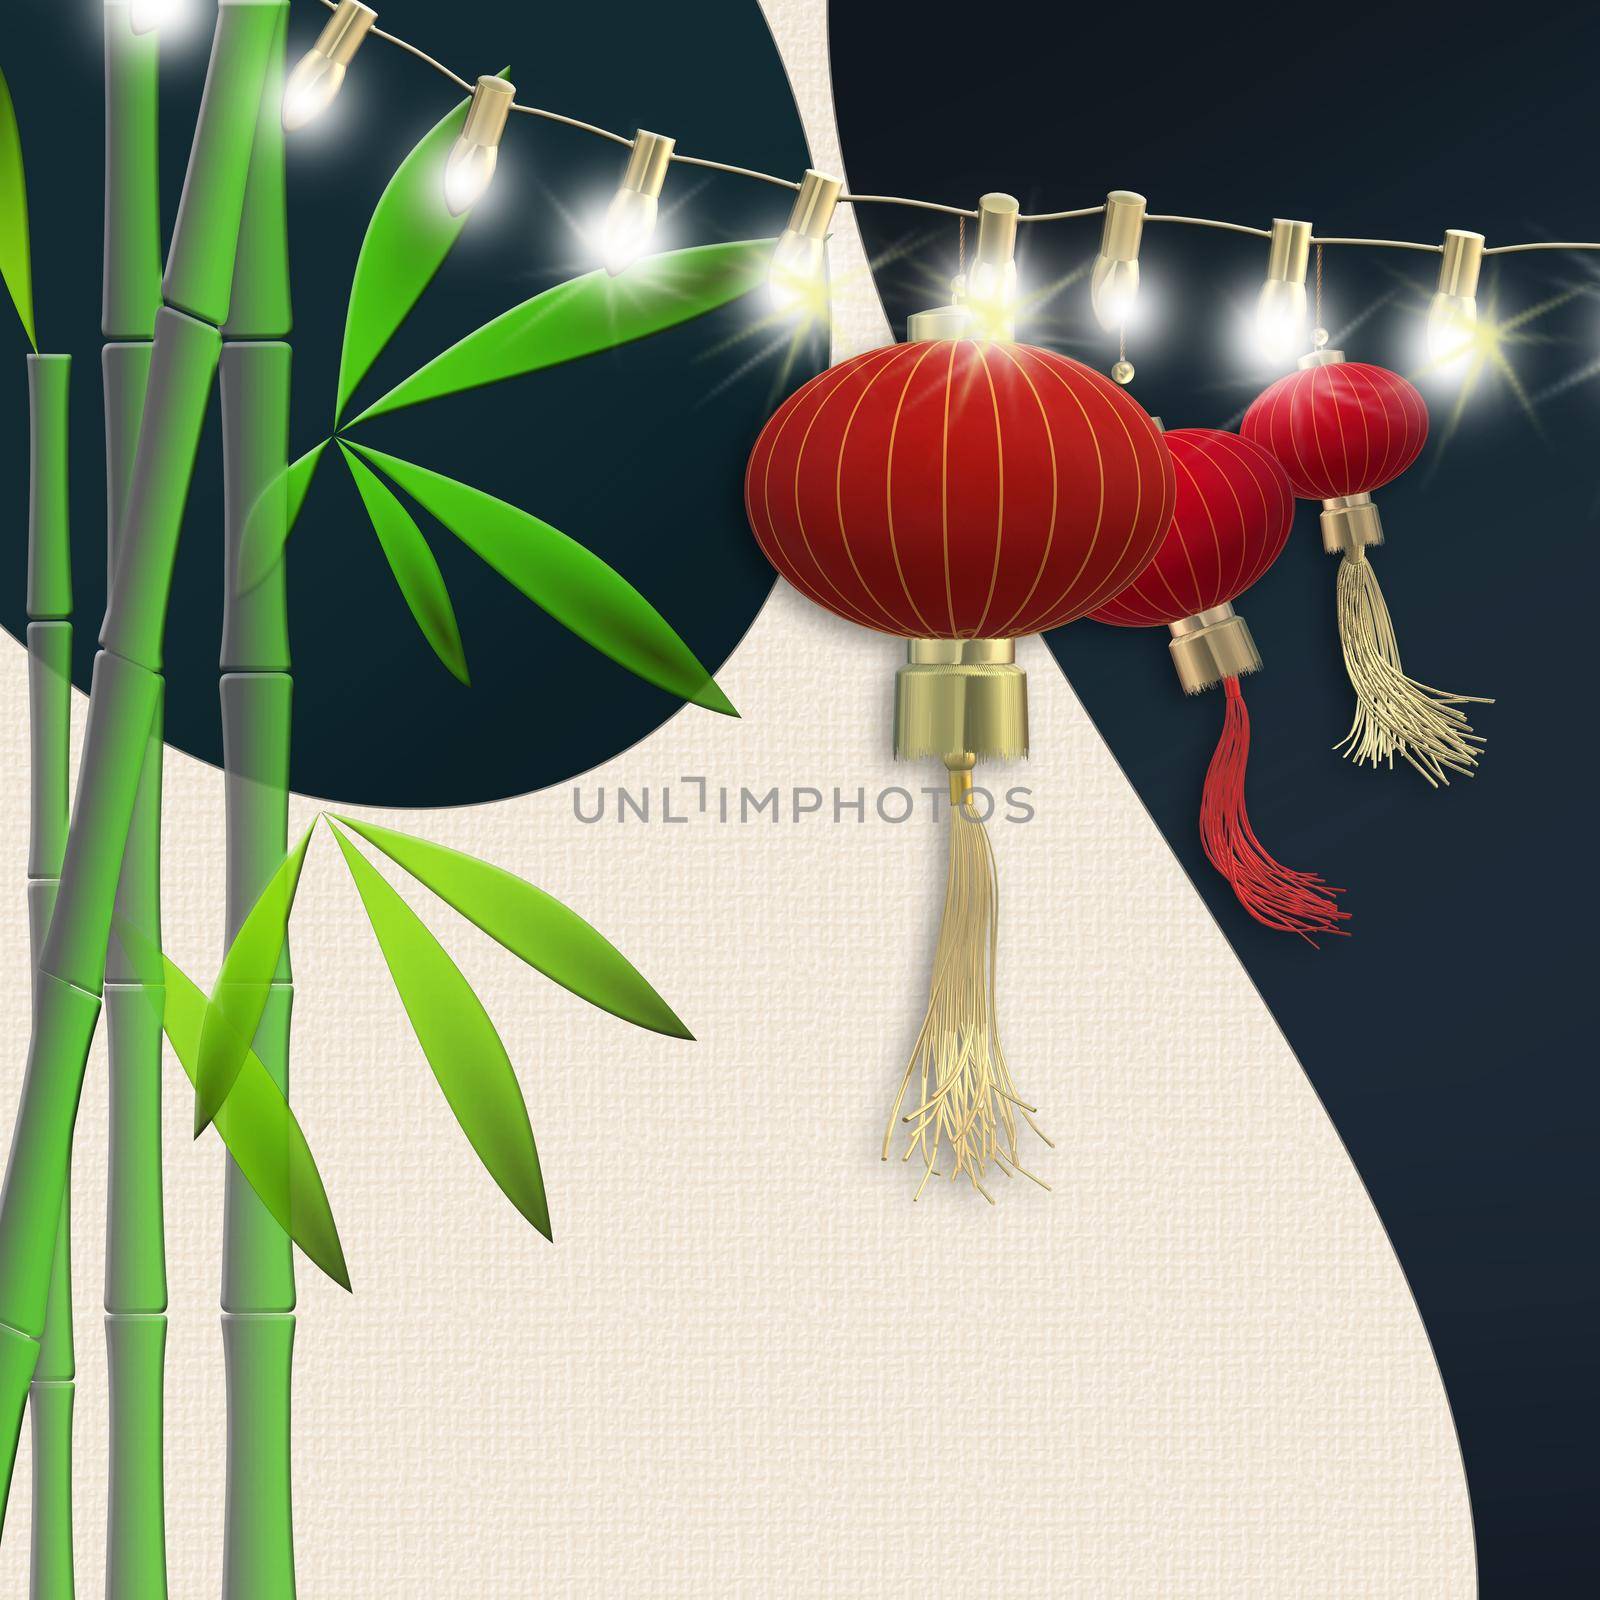 Red hanging lanterns, bamboo on blue yellow background. Traditional Asian decor for Lantern festival, mid autumn celebration, Chinese New Year. Place for text. 3D illustration